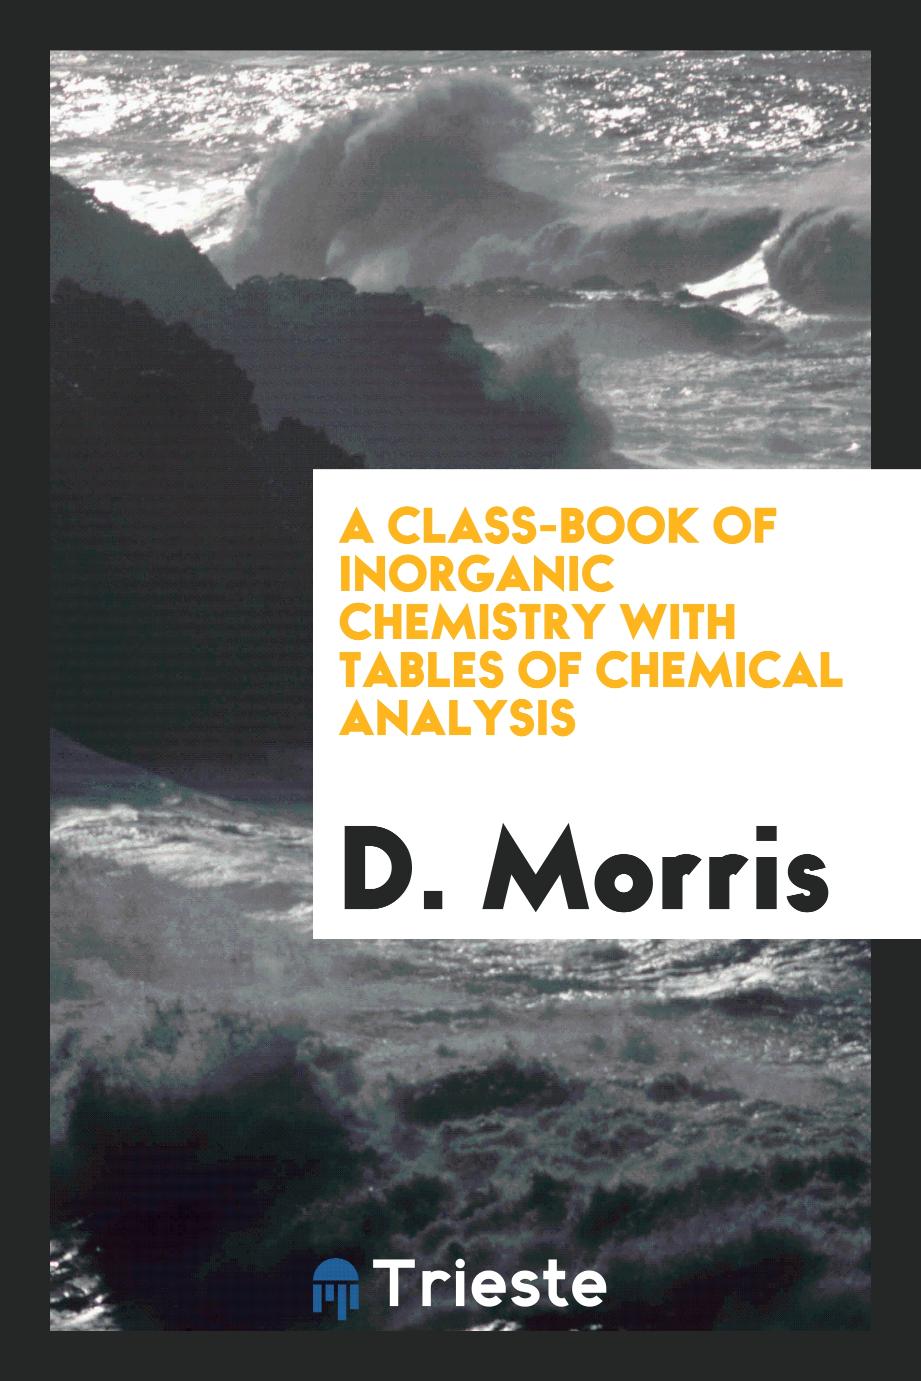 A Class-Book of Inorganic Chemistry with Tables of Chemical Analysis